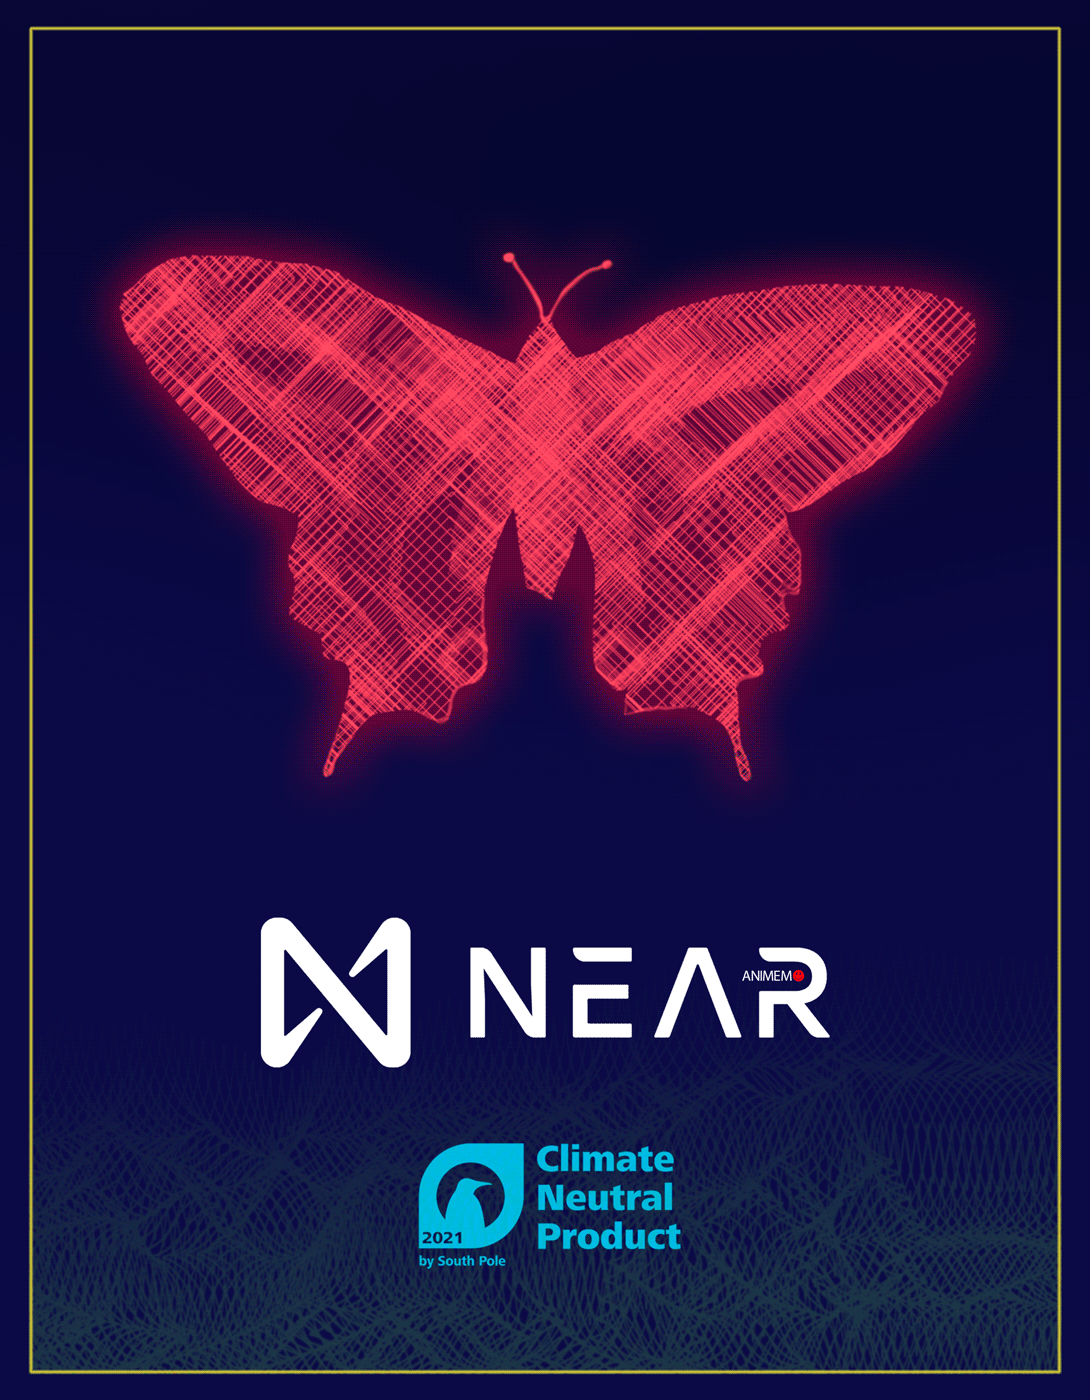 🔴 ∞ NEAR is HERE ∞ 🔴